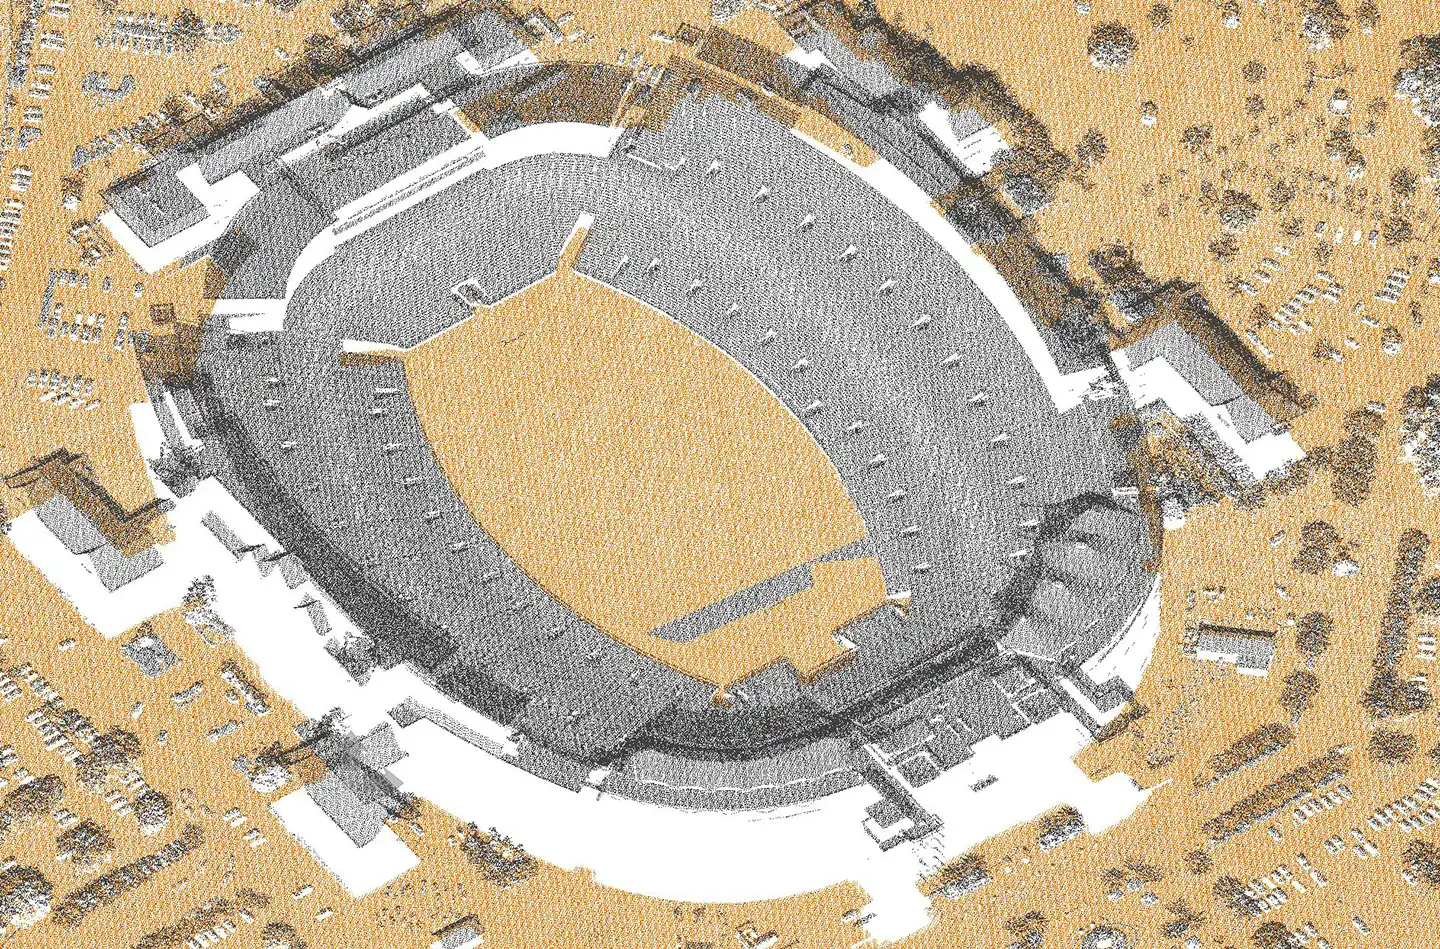 3D view of lidar point cloud data for Florida State University Football Stadium from USGS Hurricane Michael lidar project in 2020.